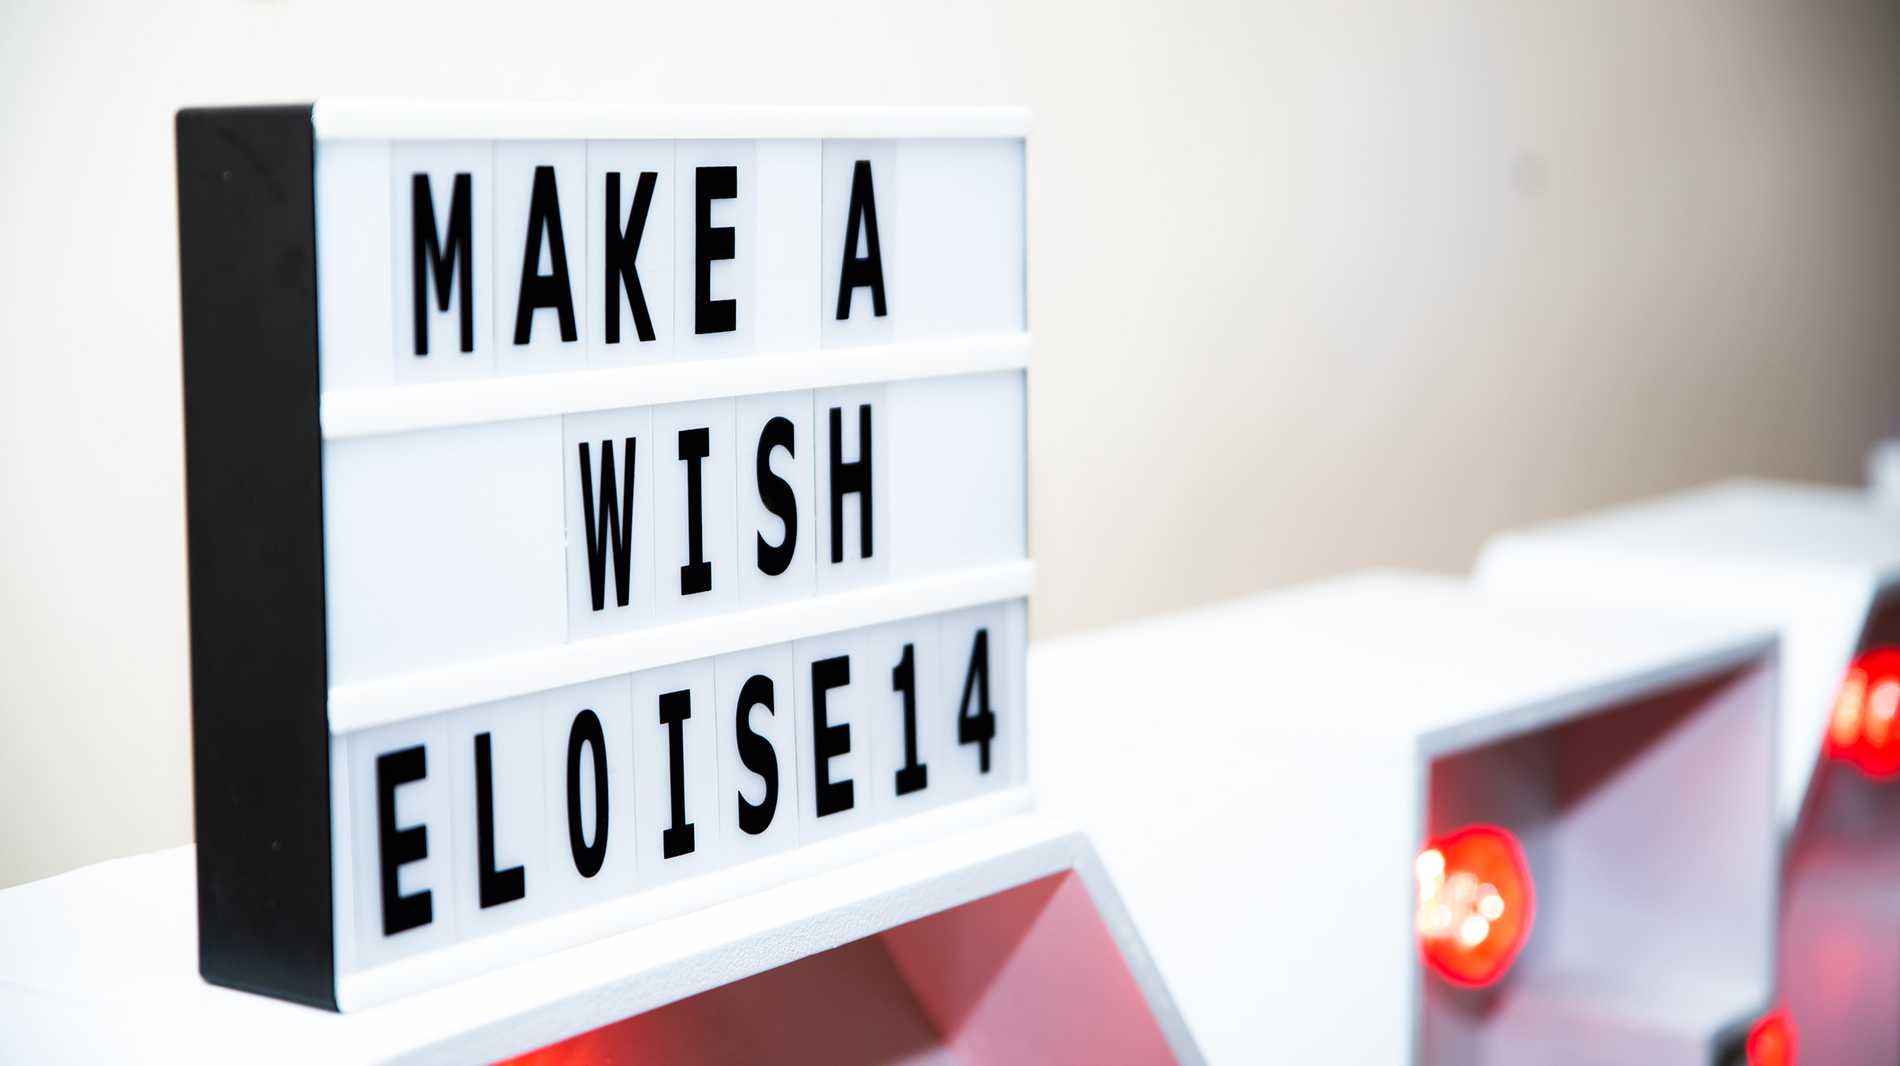 A cinema-style sign spelling out the words "Make-A-Wish Eloise 14"